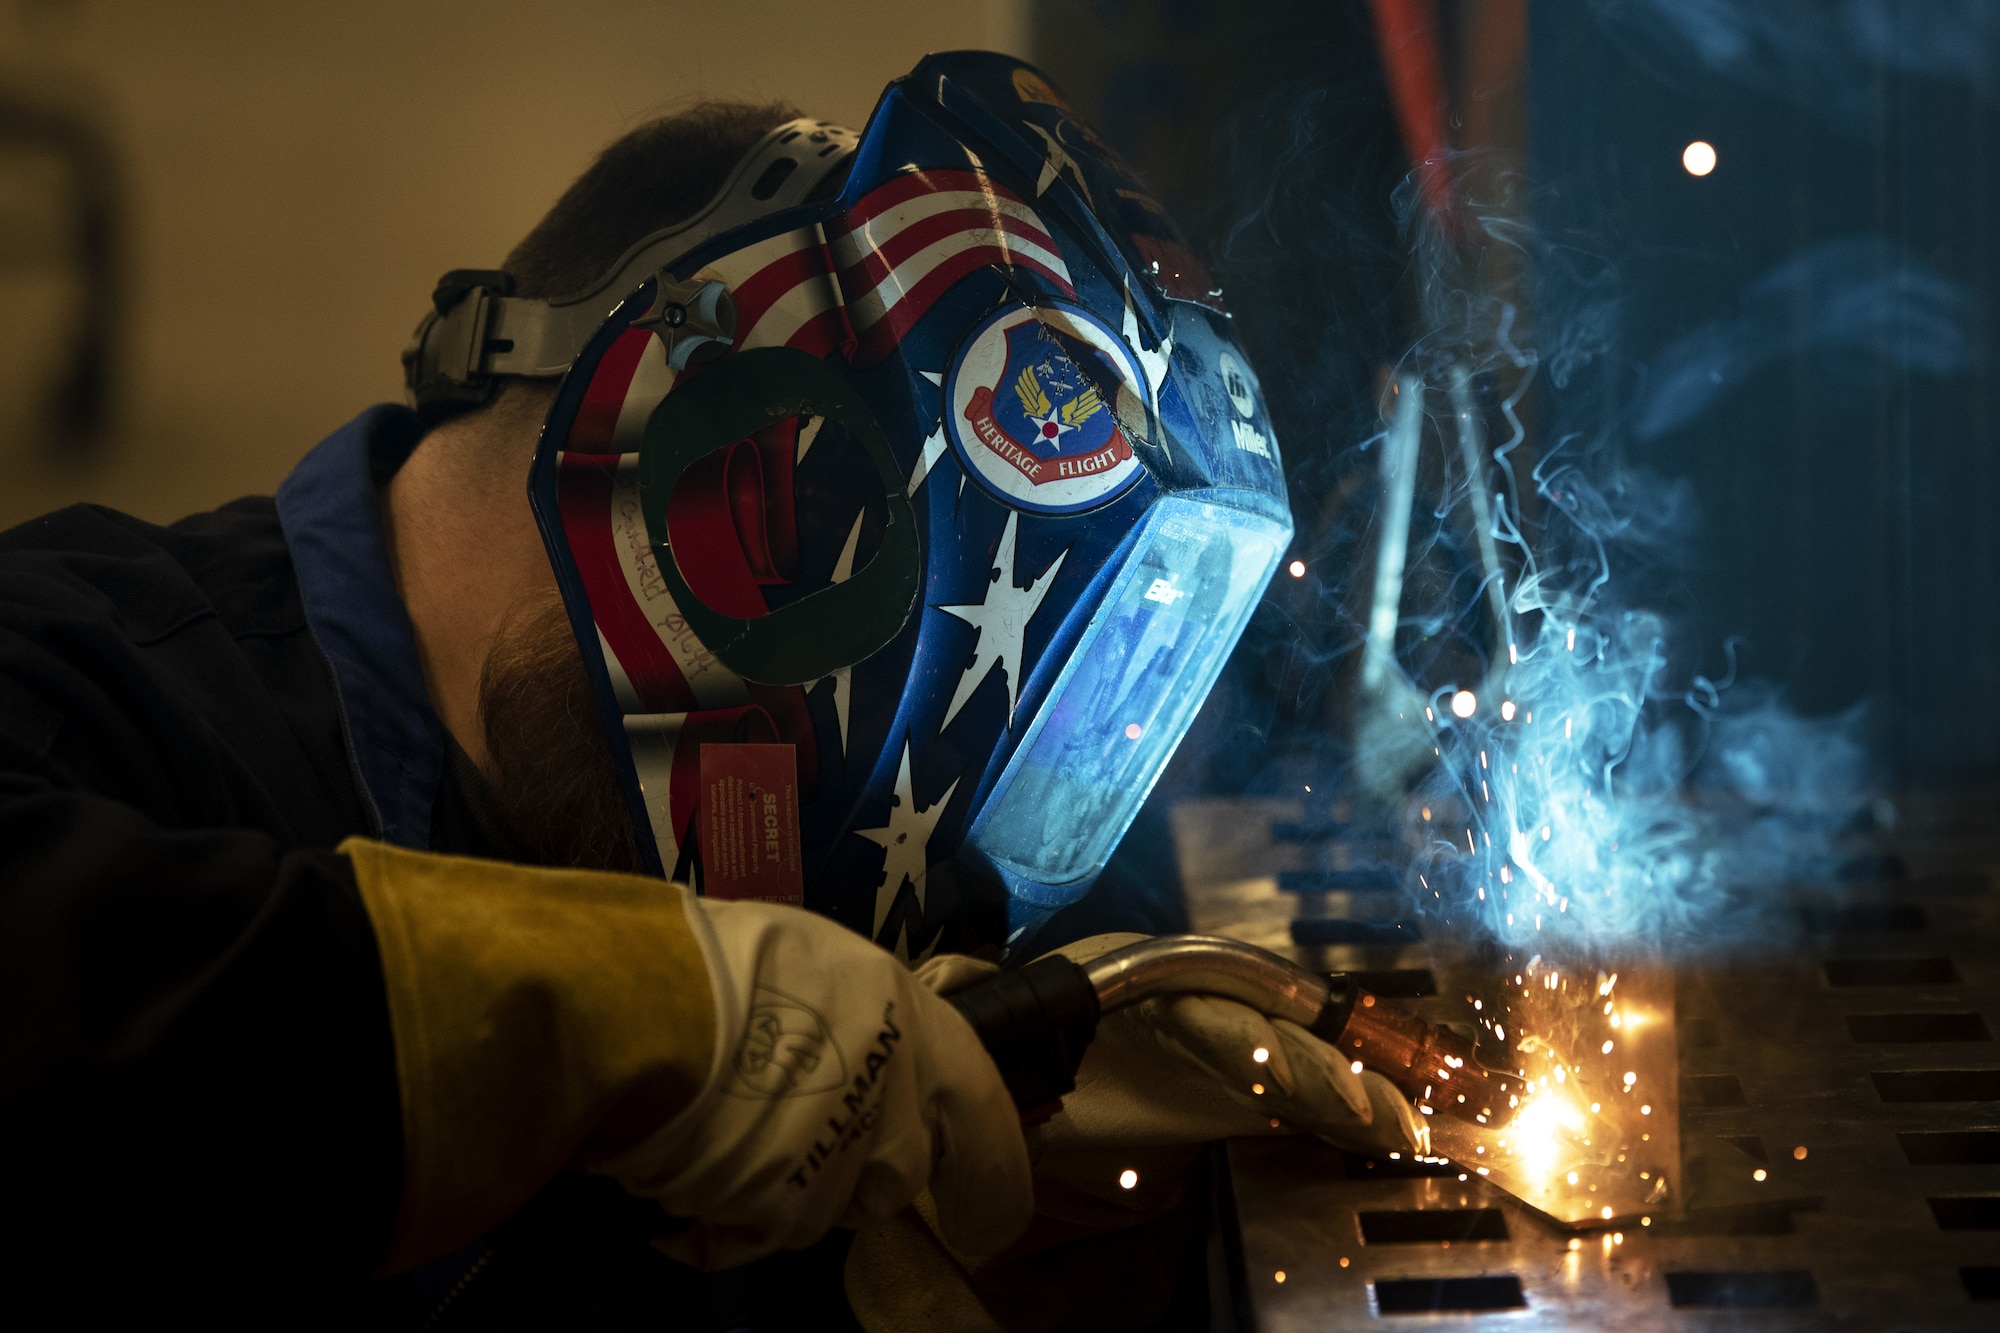 Josh Crutchfield, a civilian contractor for the 8th Aircraft Maintenance Unit, welds pieces of metal together, May 18, 2022, on Holloman Air Force Base, New Mexico.